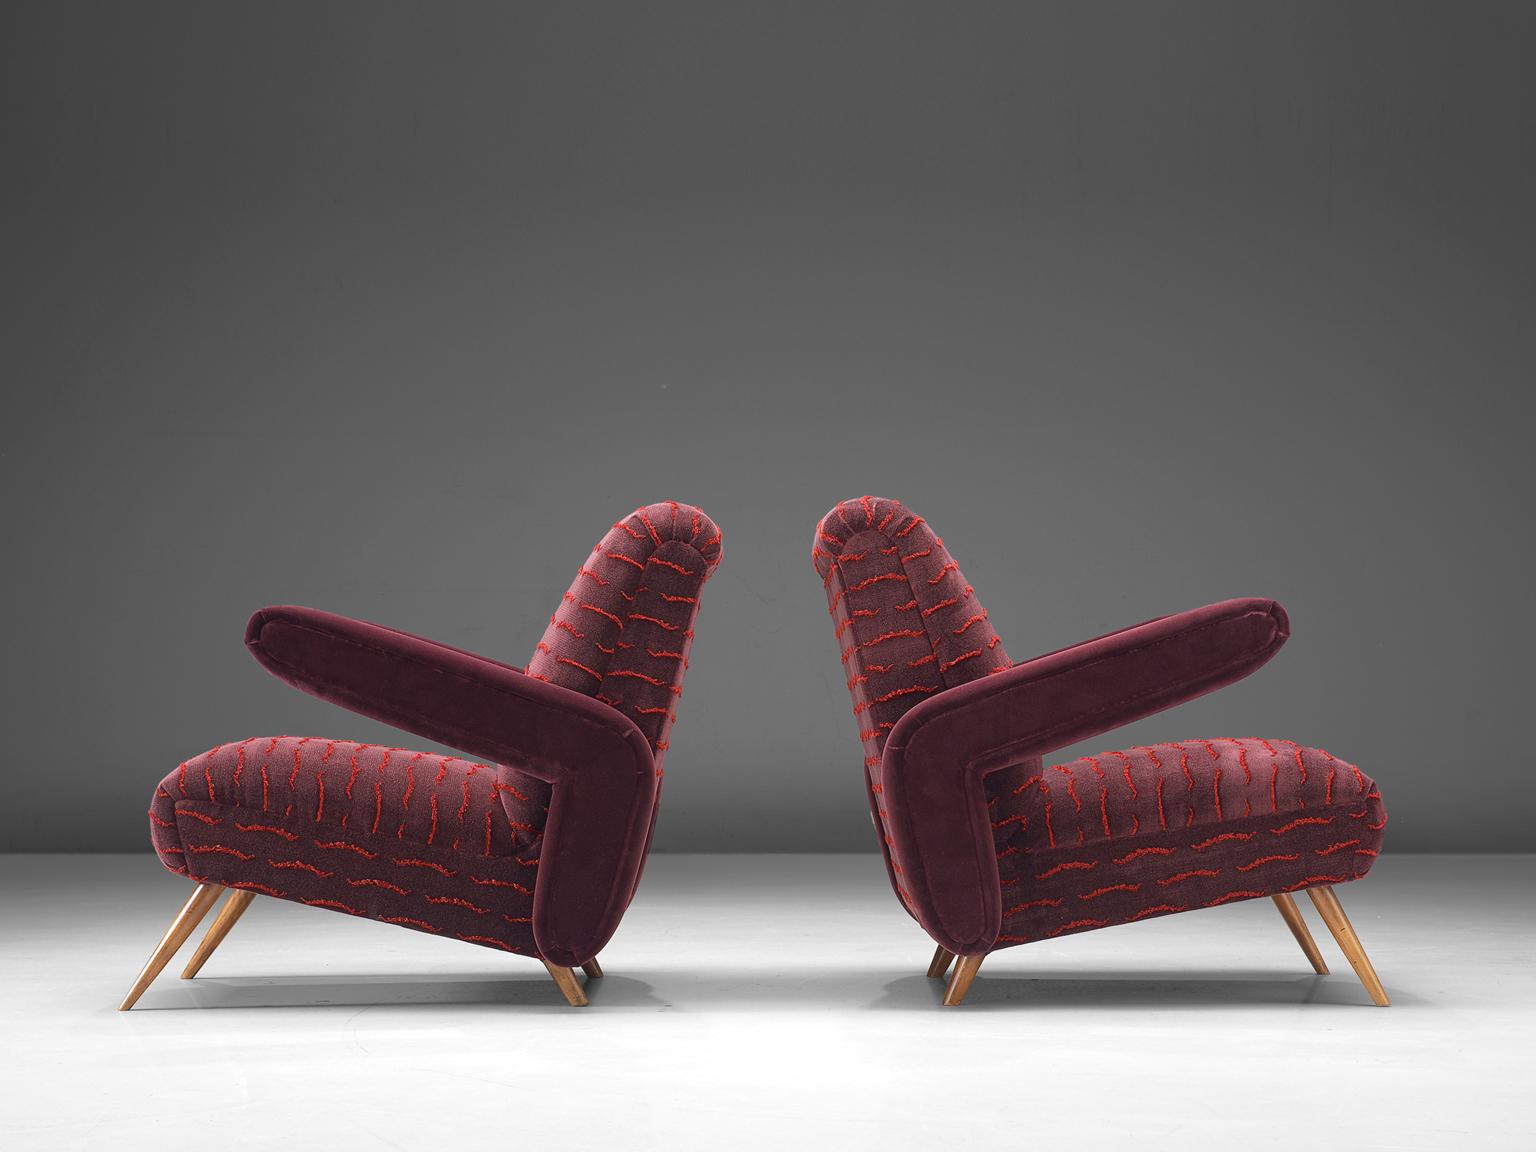 Mid-20th Century Rare Pair of Brazilian Armchairs Reupholstered in Luxurious Burgundy Velvets